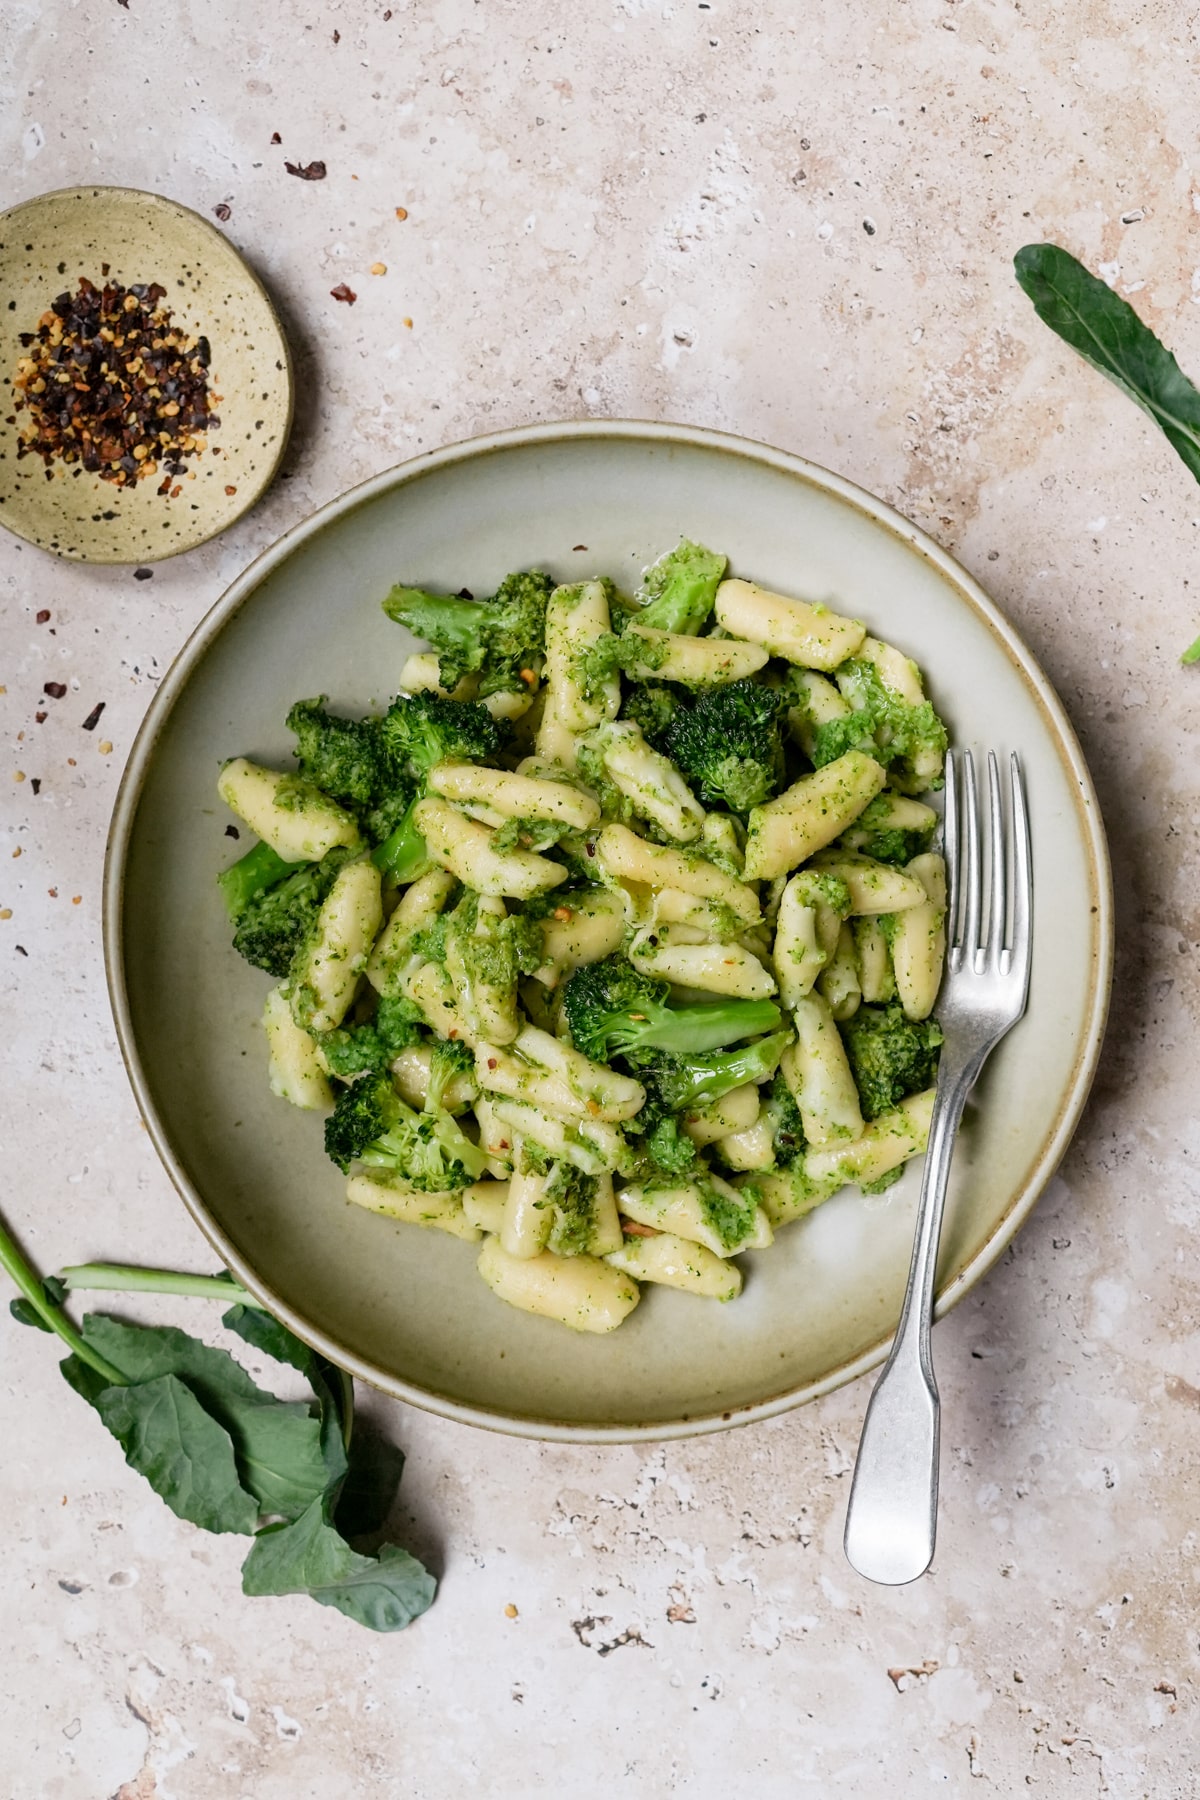 Cavatelli and broccoli in a bowl surrounded by broccoli leaves